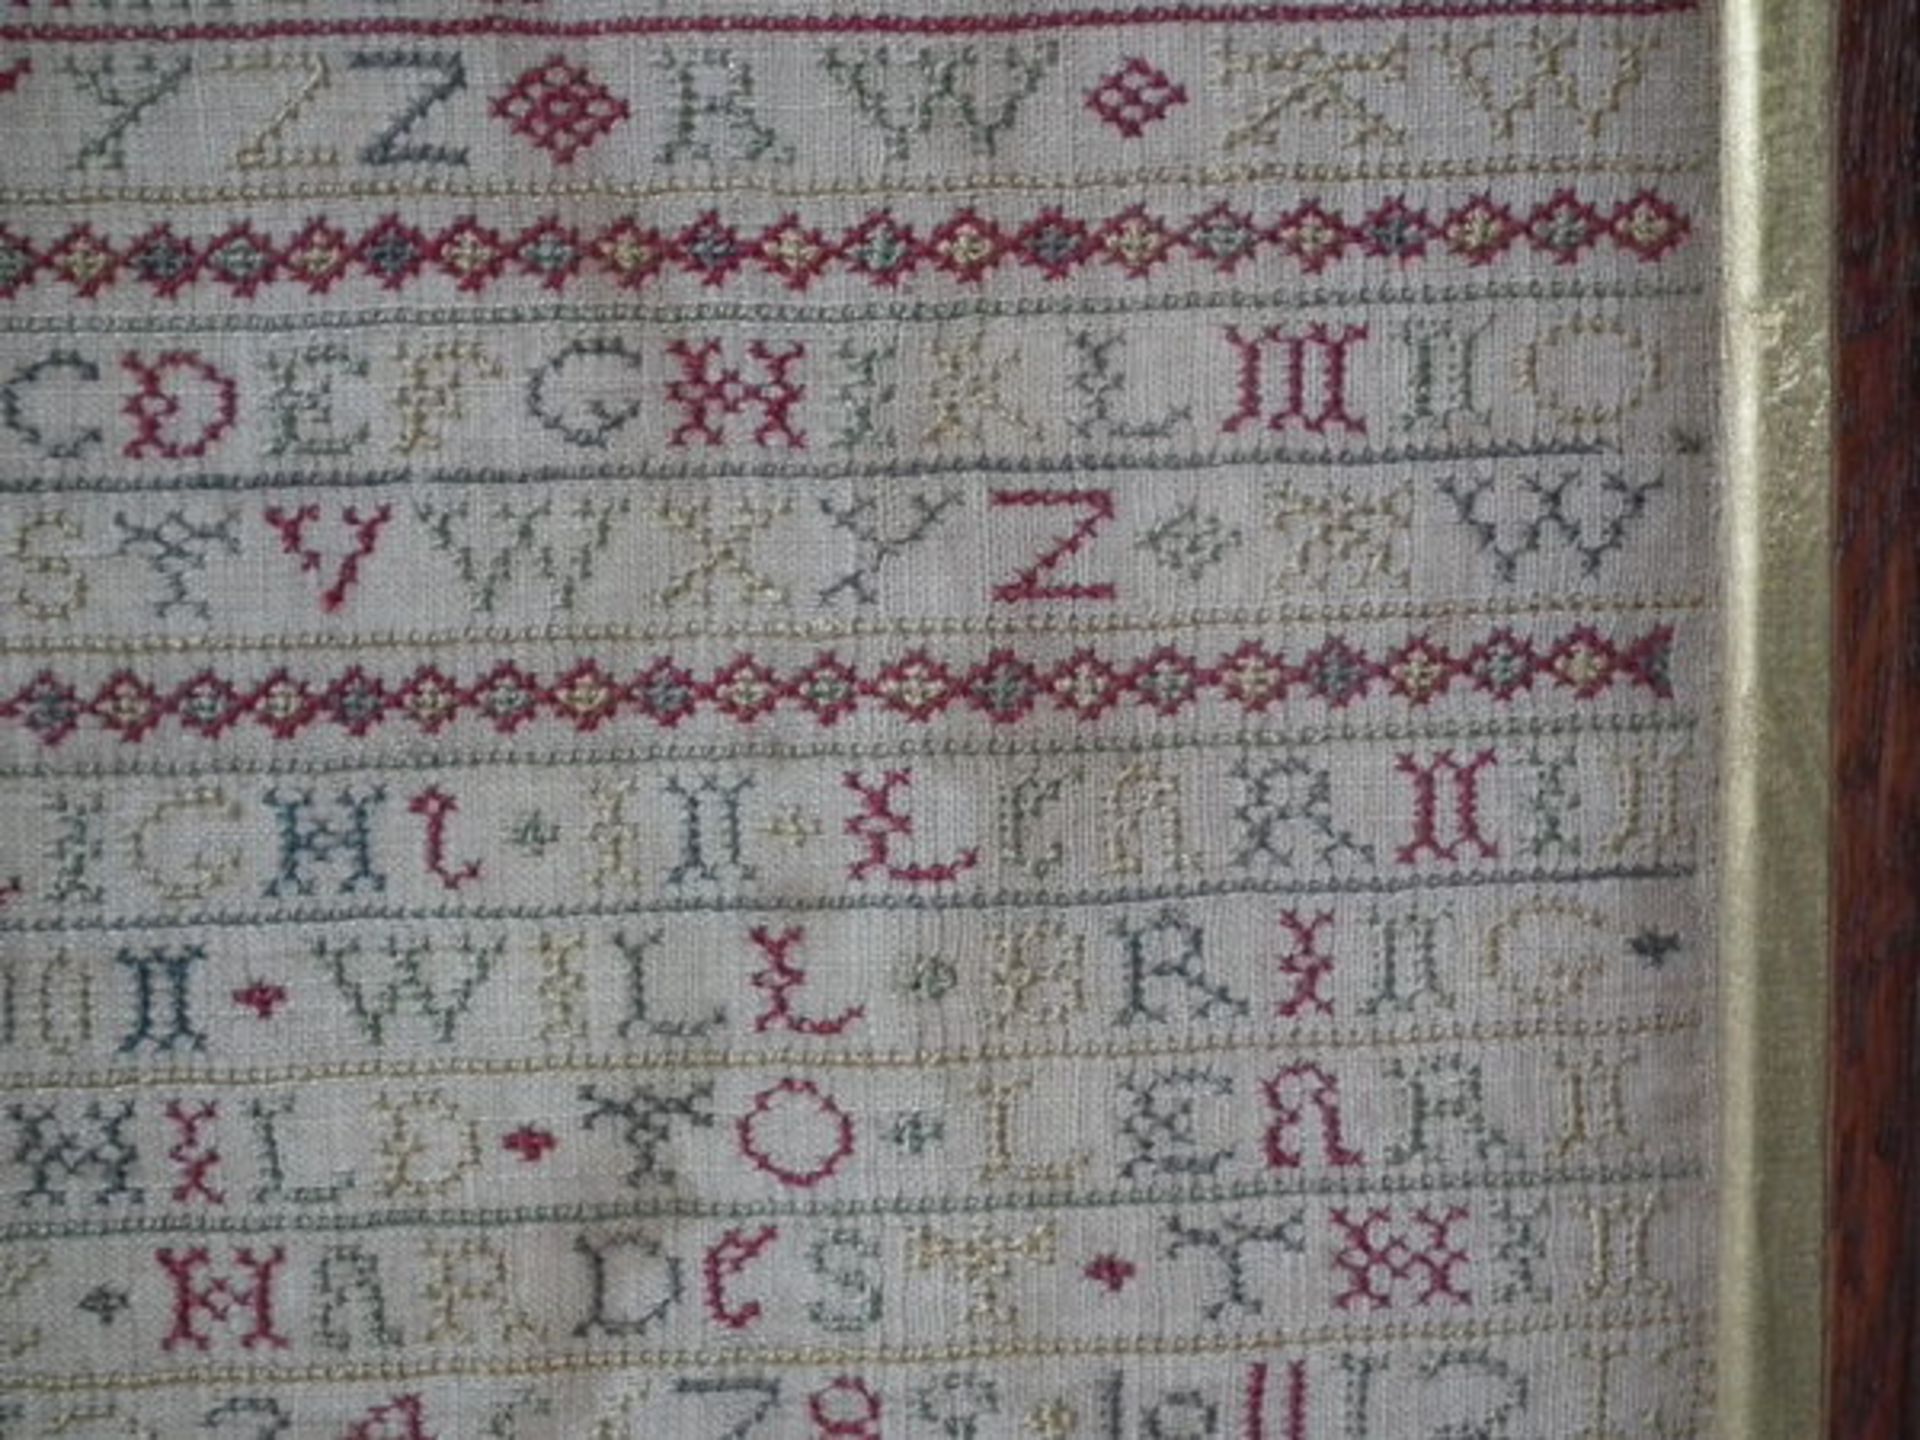 Needlework Band Sampler dated 1724 by Ann Wooding - FREE UK DELIVERY - Image 10 of 20